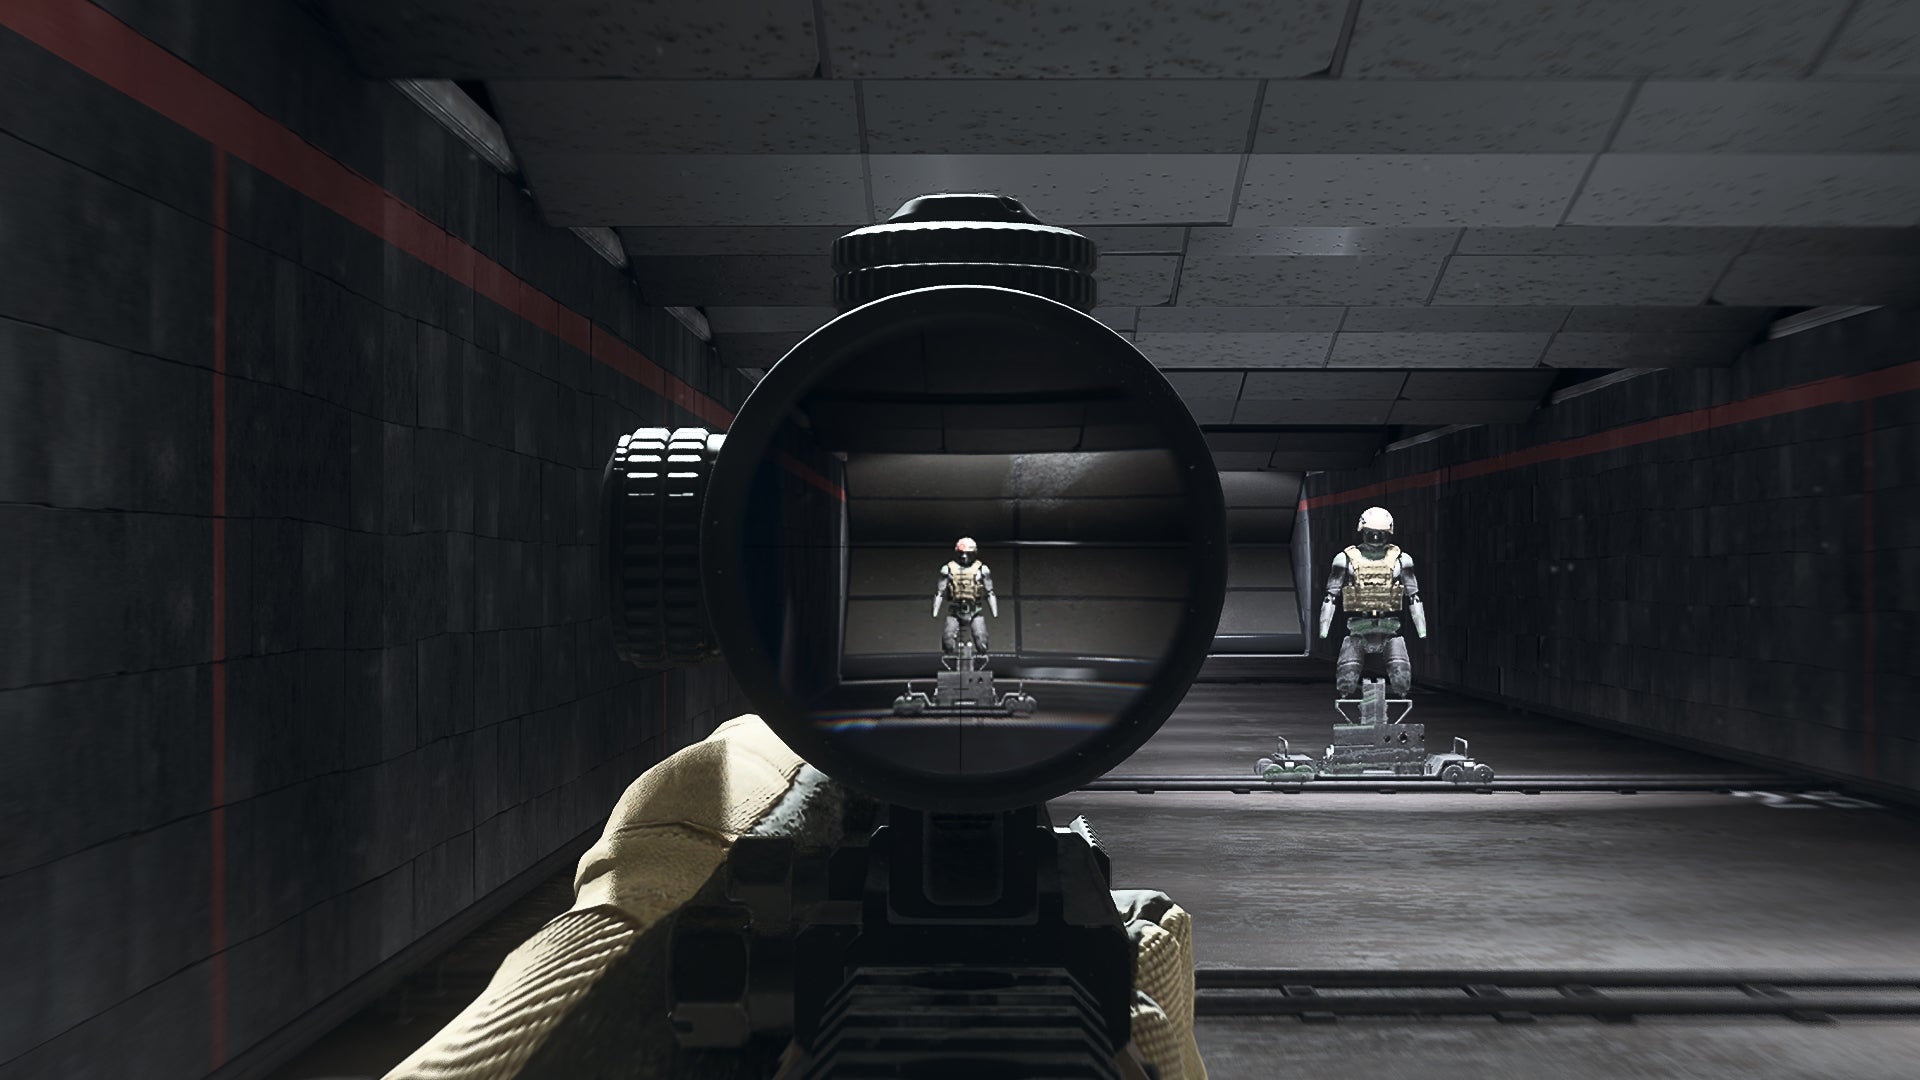 The player in Warzone 2.0 aims at a training dummy using the Forge Tac Delta 4 optic attachment.